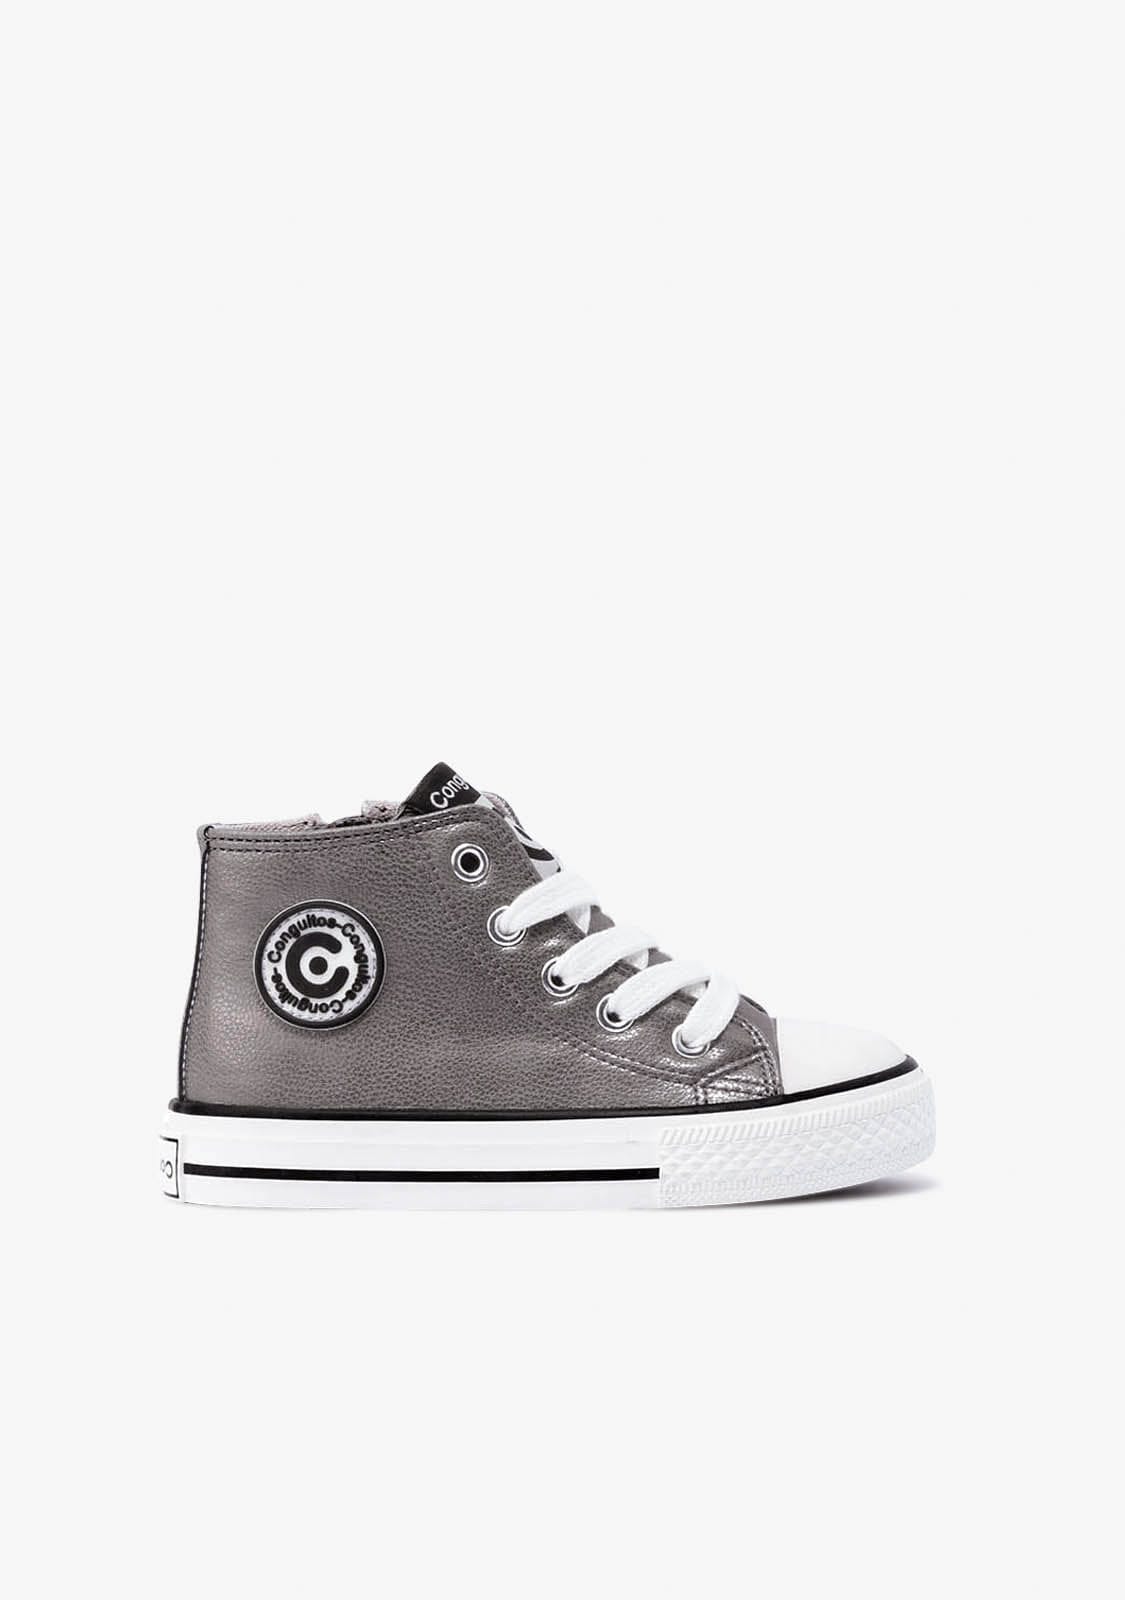 CONGUITOS Shoes Girl's Pewter Hi-Top Sneakers